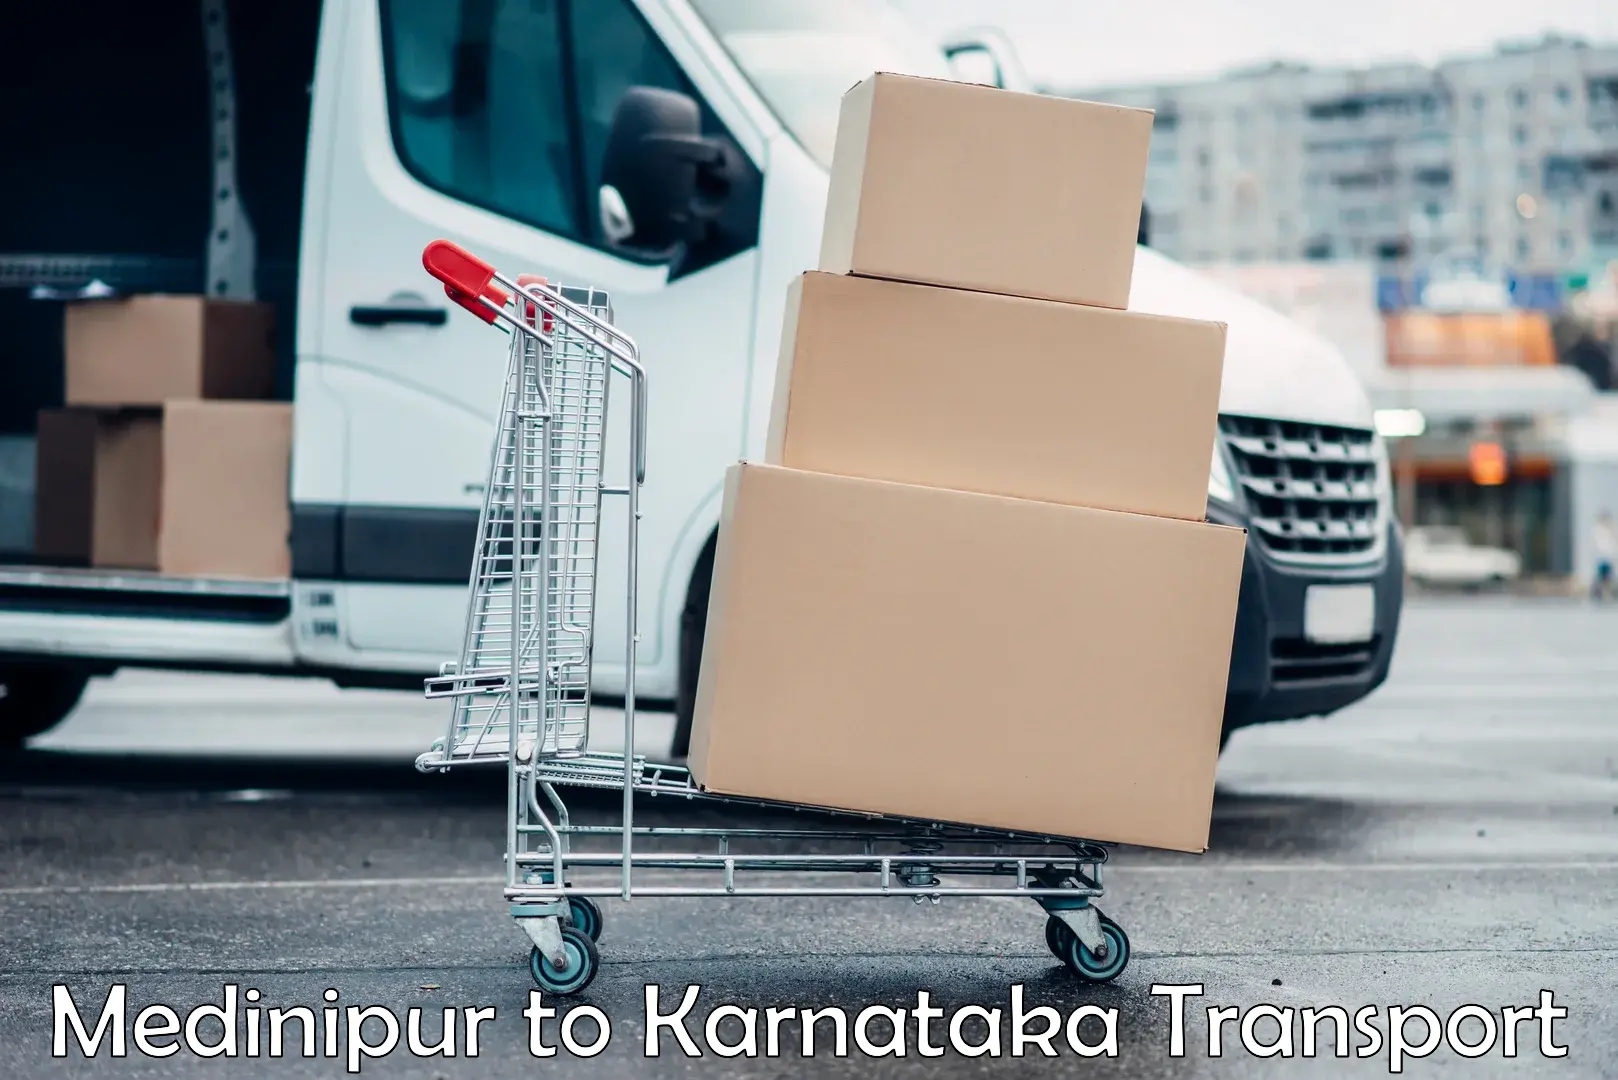 Delivery service Medinipur to Channapatna